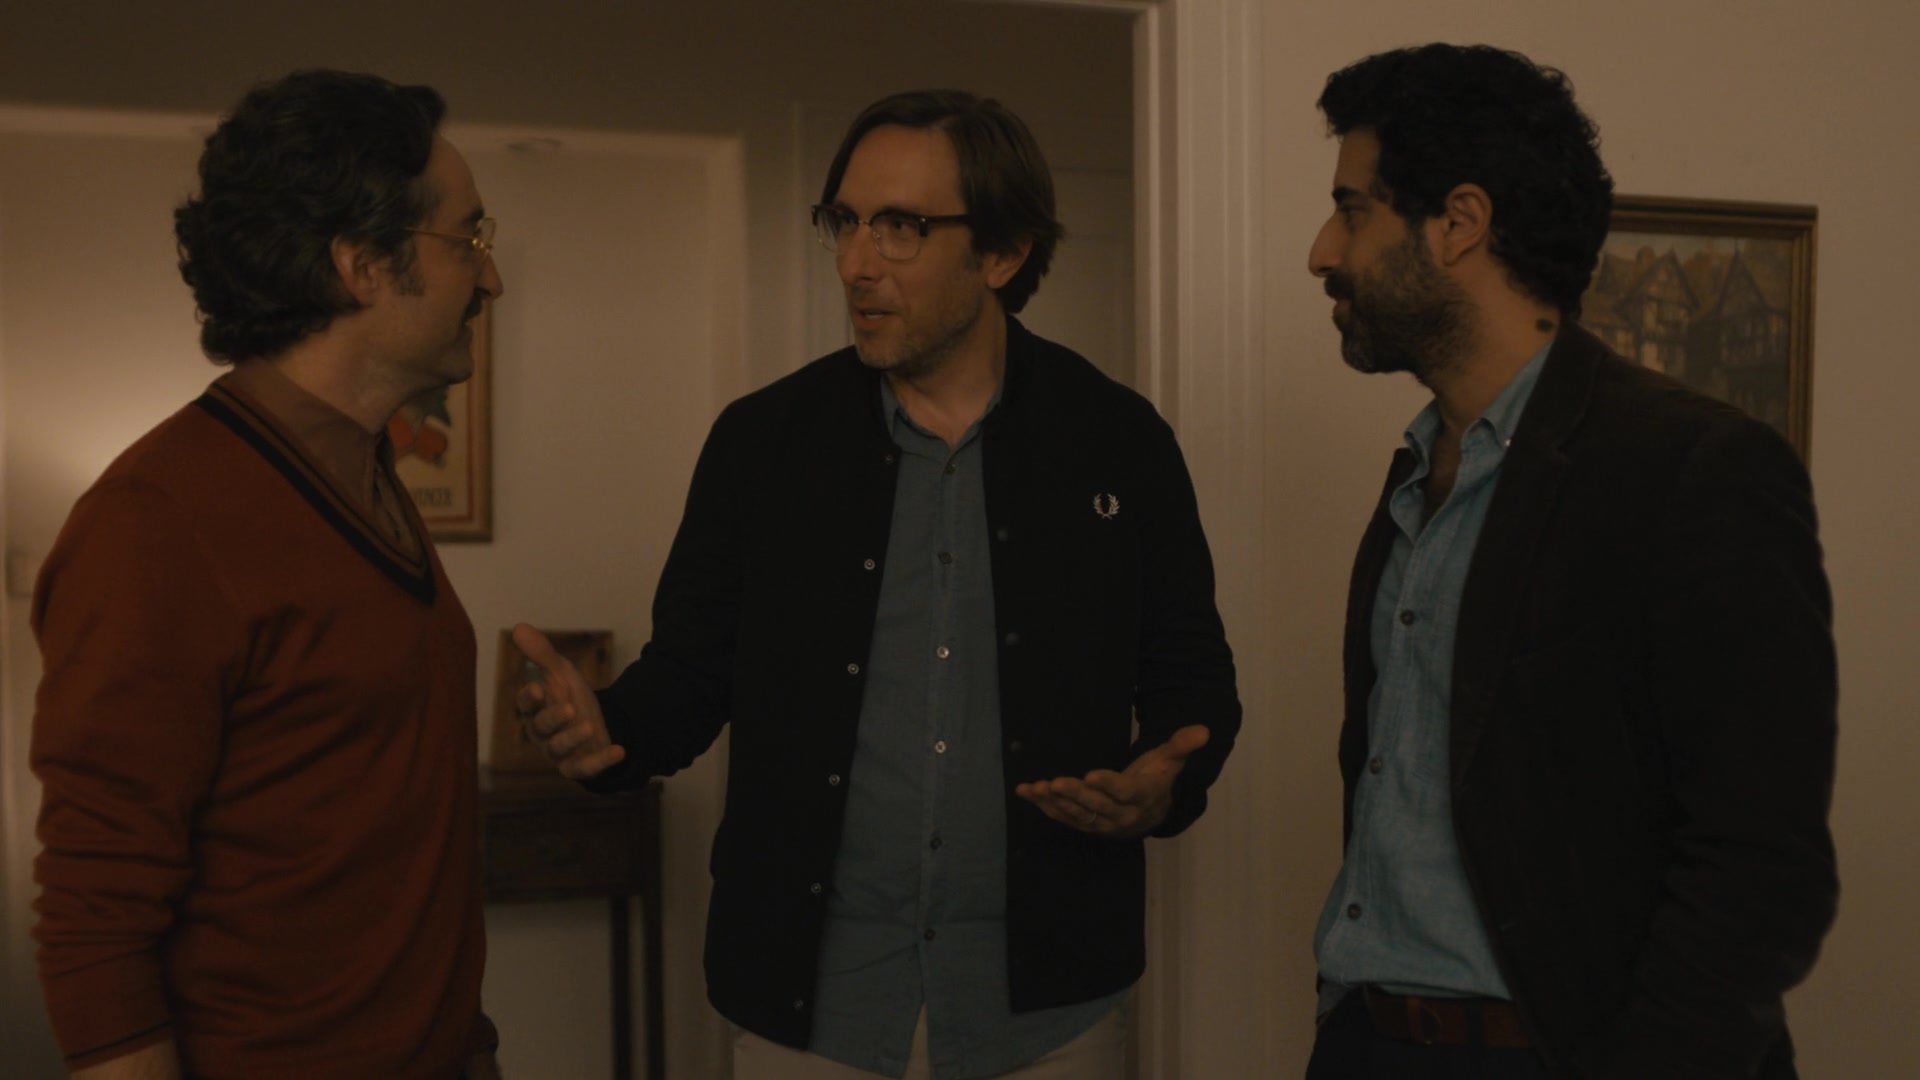 Fred Perry Cardigan Of Timm Sharp As William In On The Verge S01E02 "Viva  Italia!" (2021)